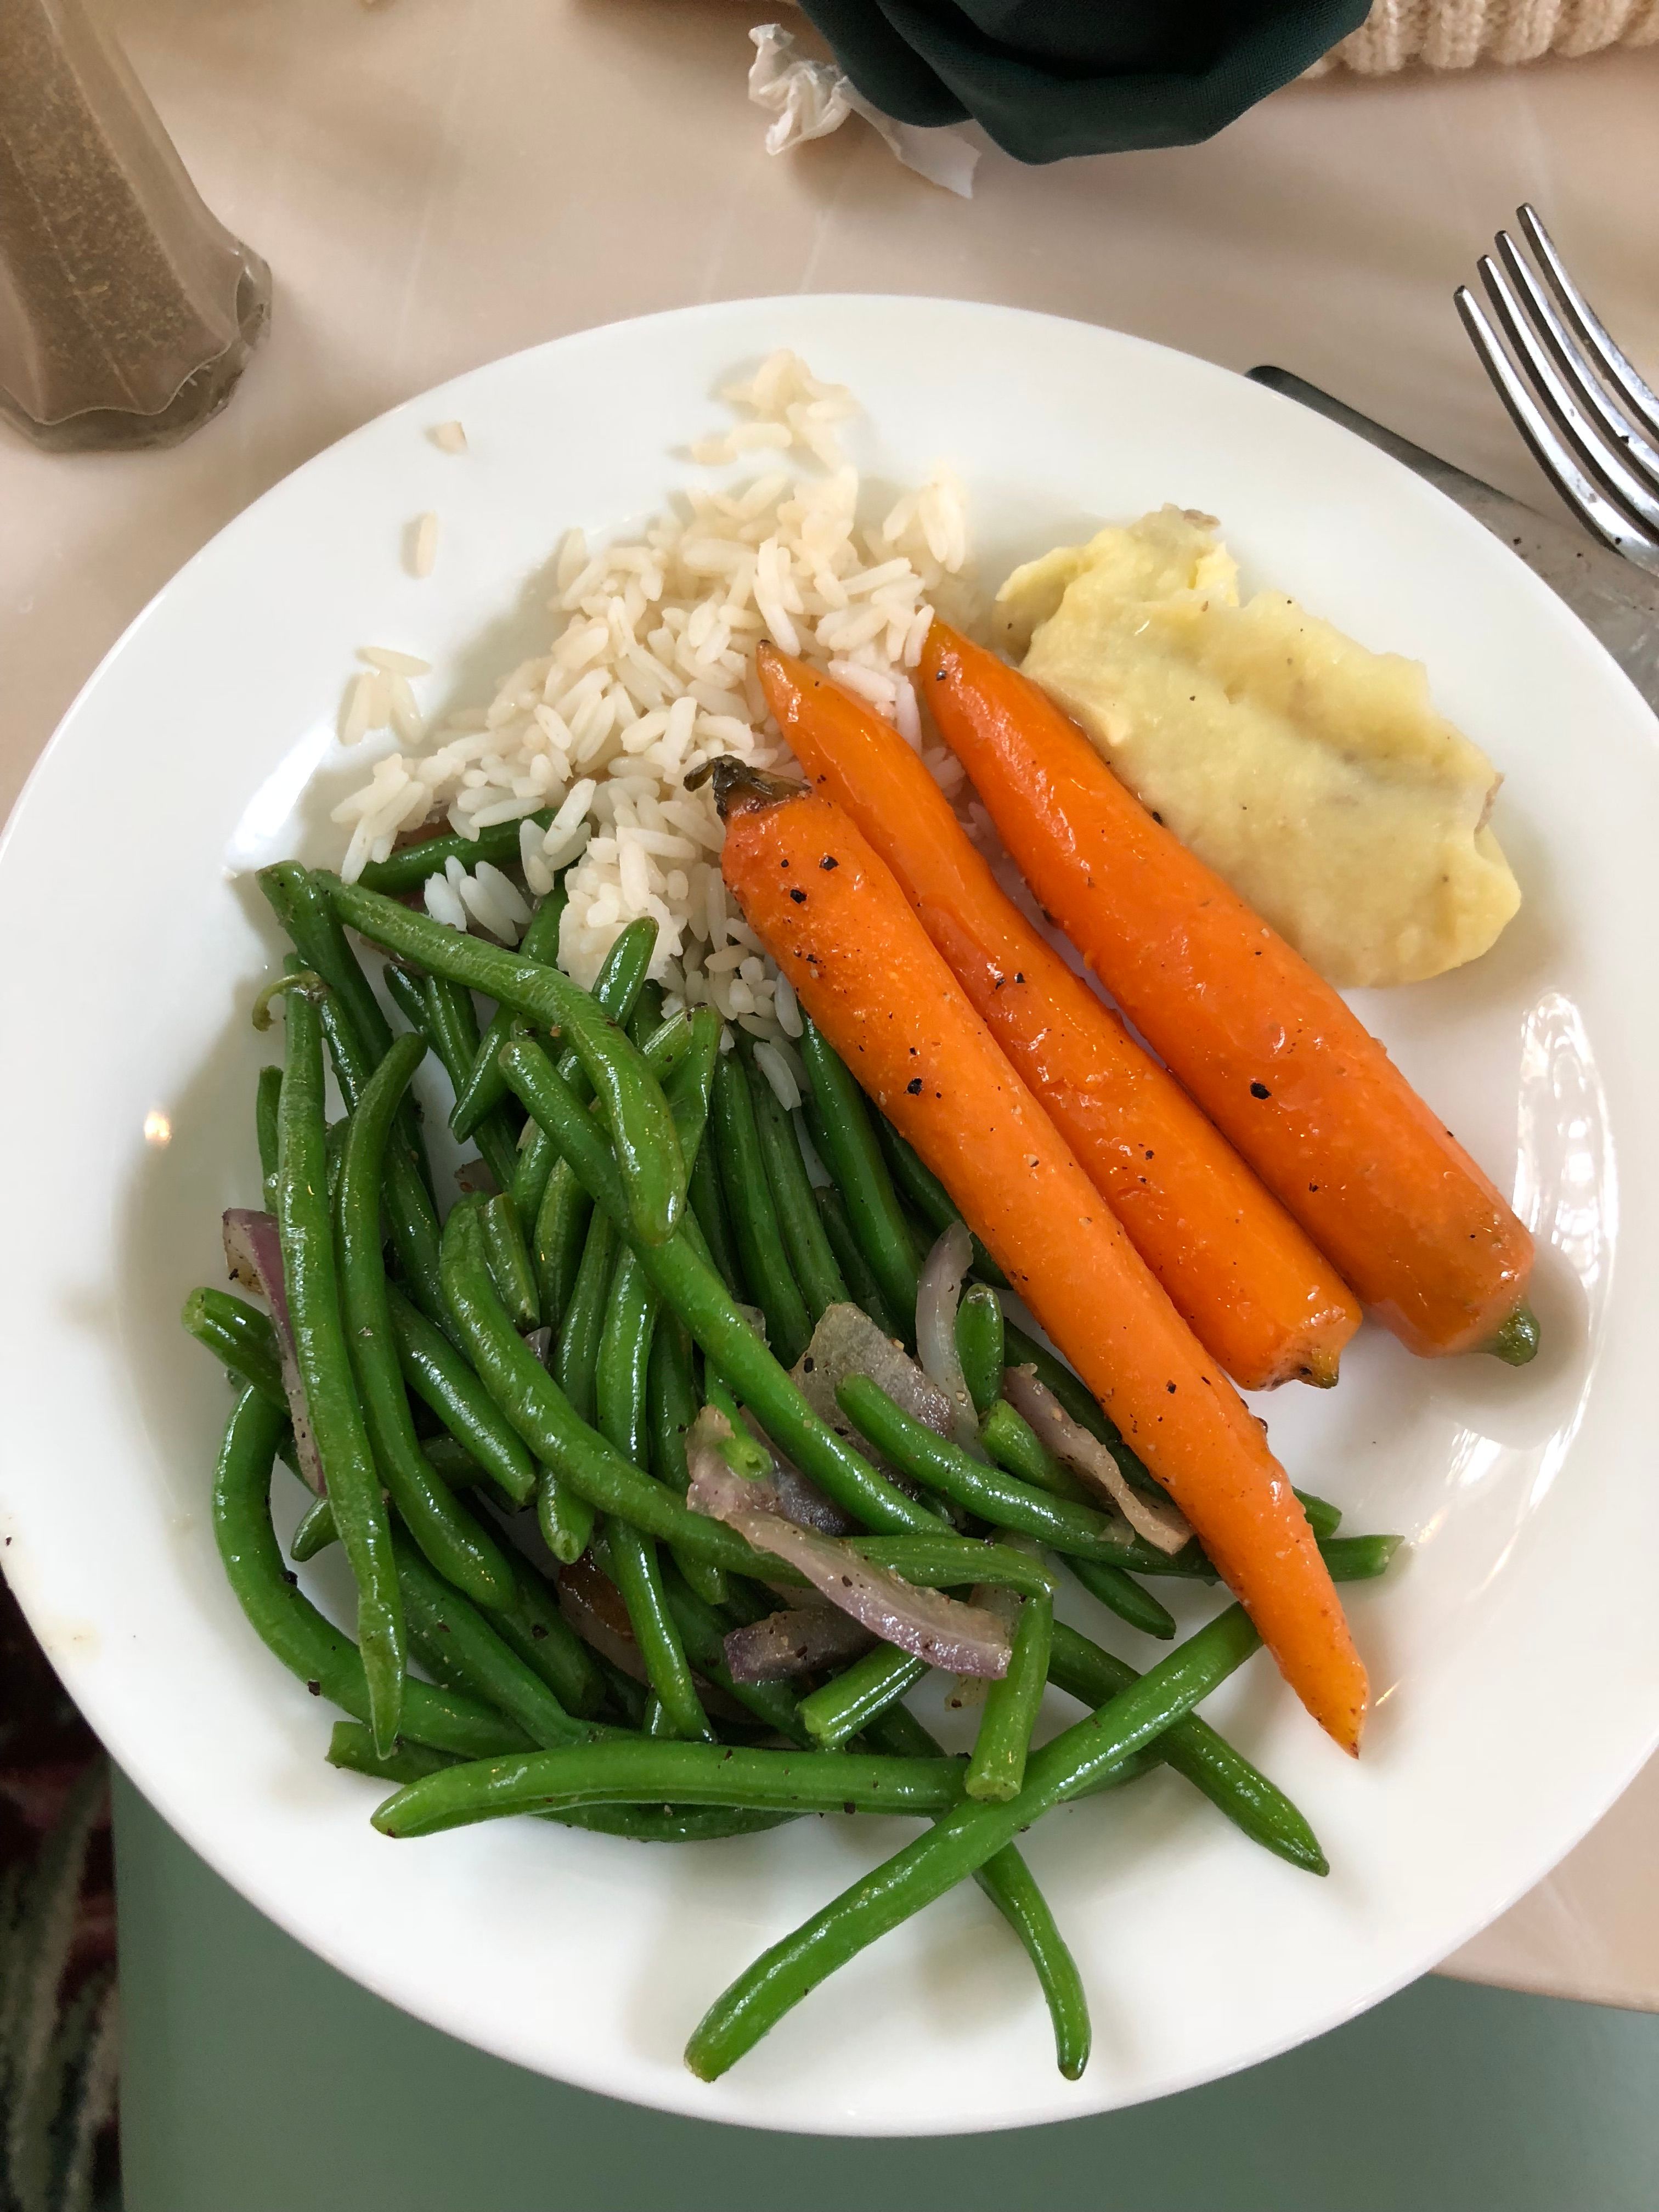 Green beans and carrots Lunch Buffet in Walt Disney World at Crystal Palace!.jpg